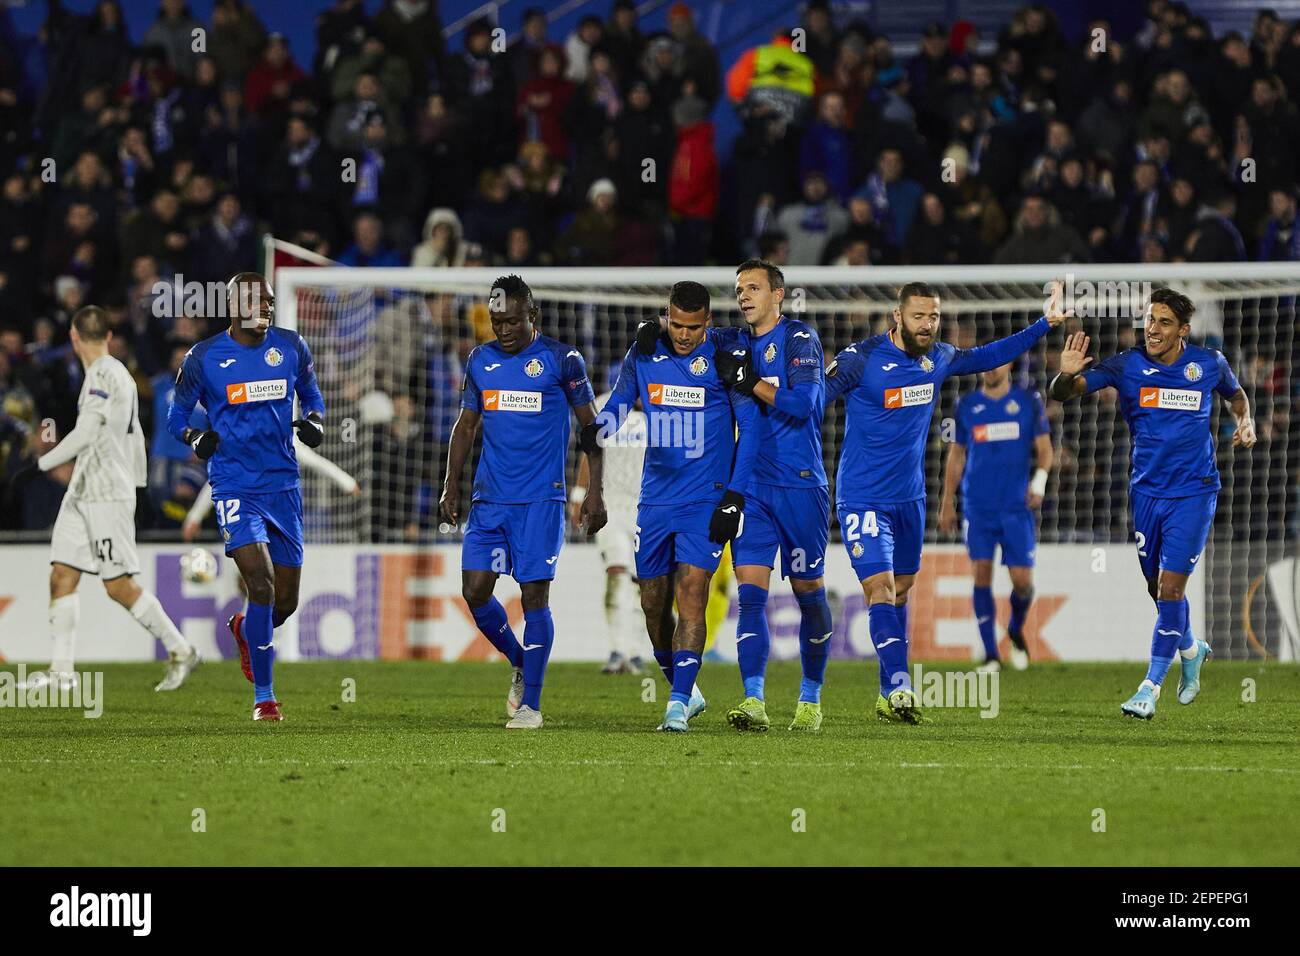 Players of Getafe FC celebrate a goal during the UEFA Europa League between  Getafe CF and FC Krasnodar at Coliseum Alfonso Perez in Madrid. (Final  score; Getafe CF 3:0 FC Krasnodar) (Photo